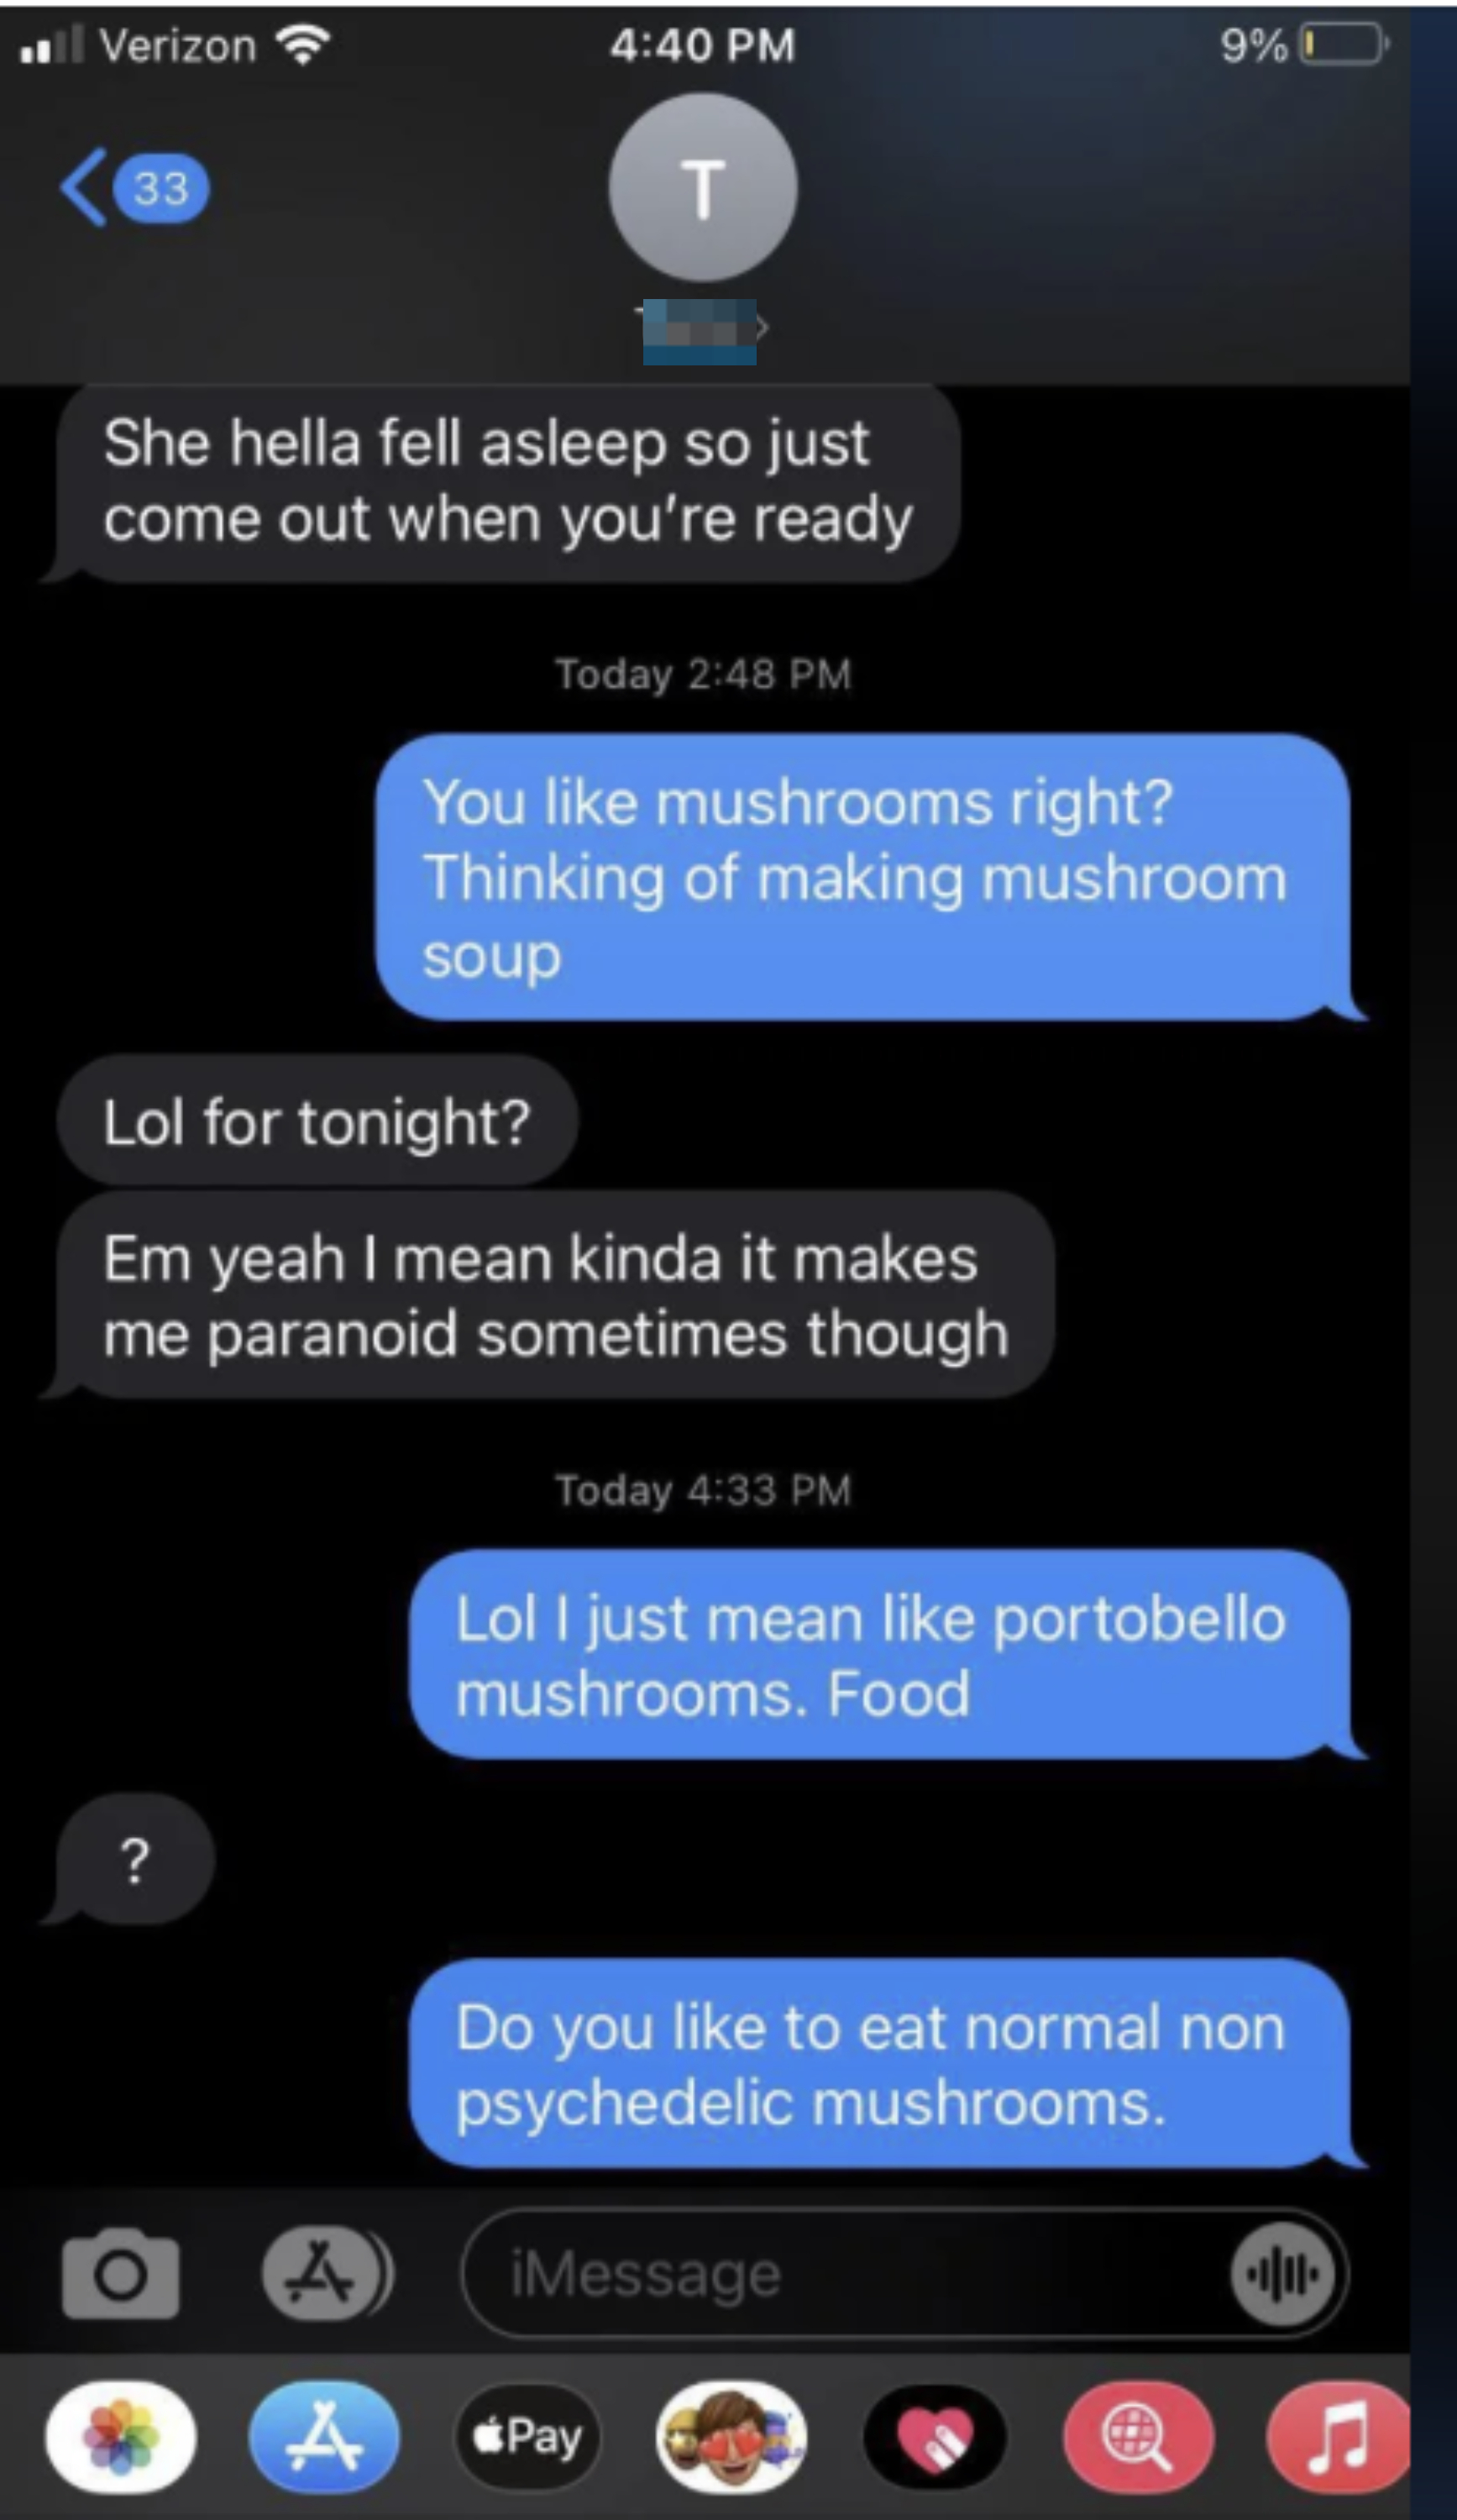 Text conversation about eating mushrooms, including the difference between normal and psychedelic varieties